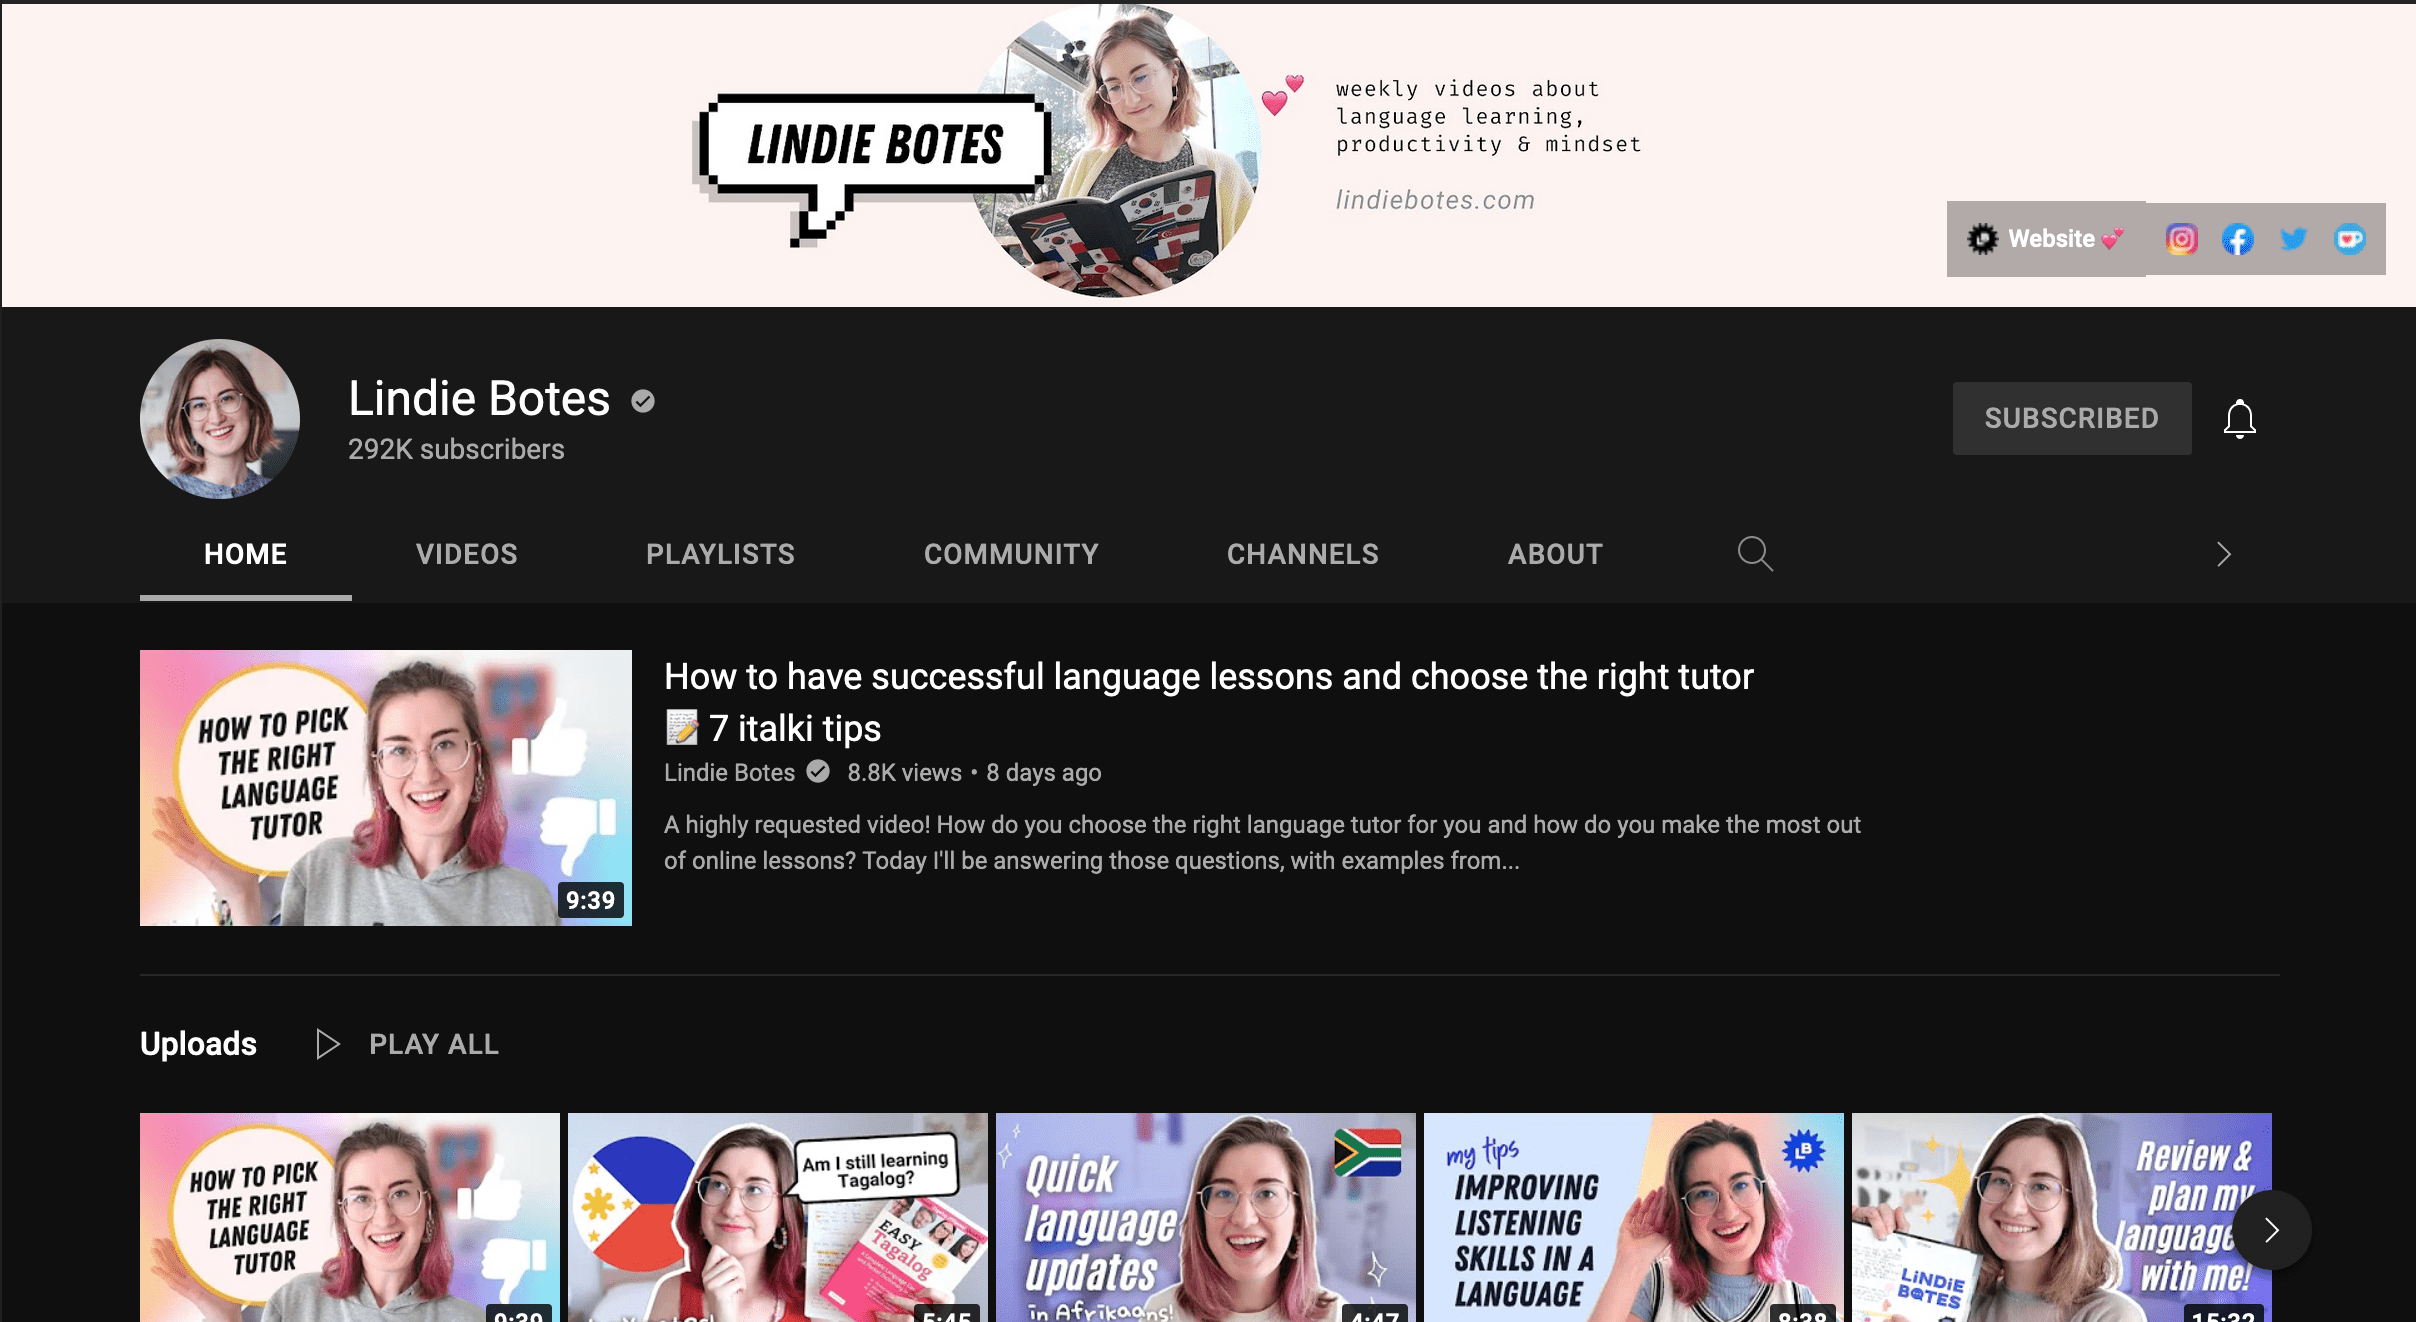 Language YouTube channel Lindie Botes